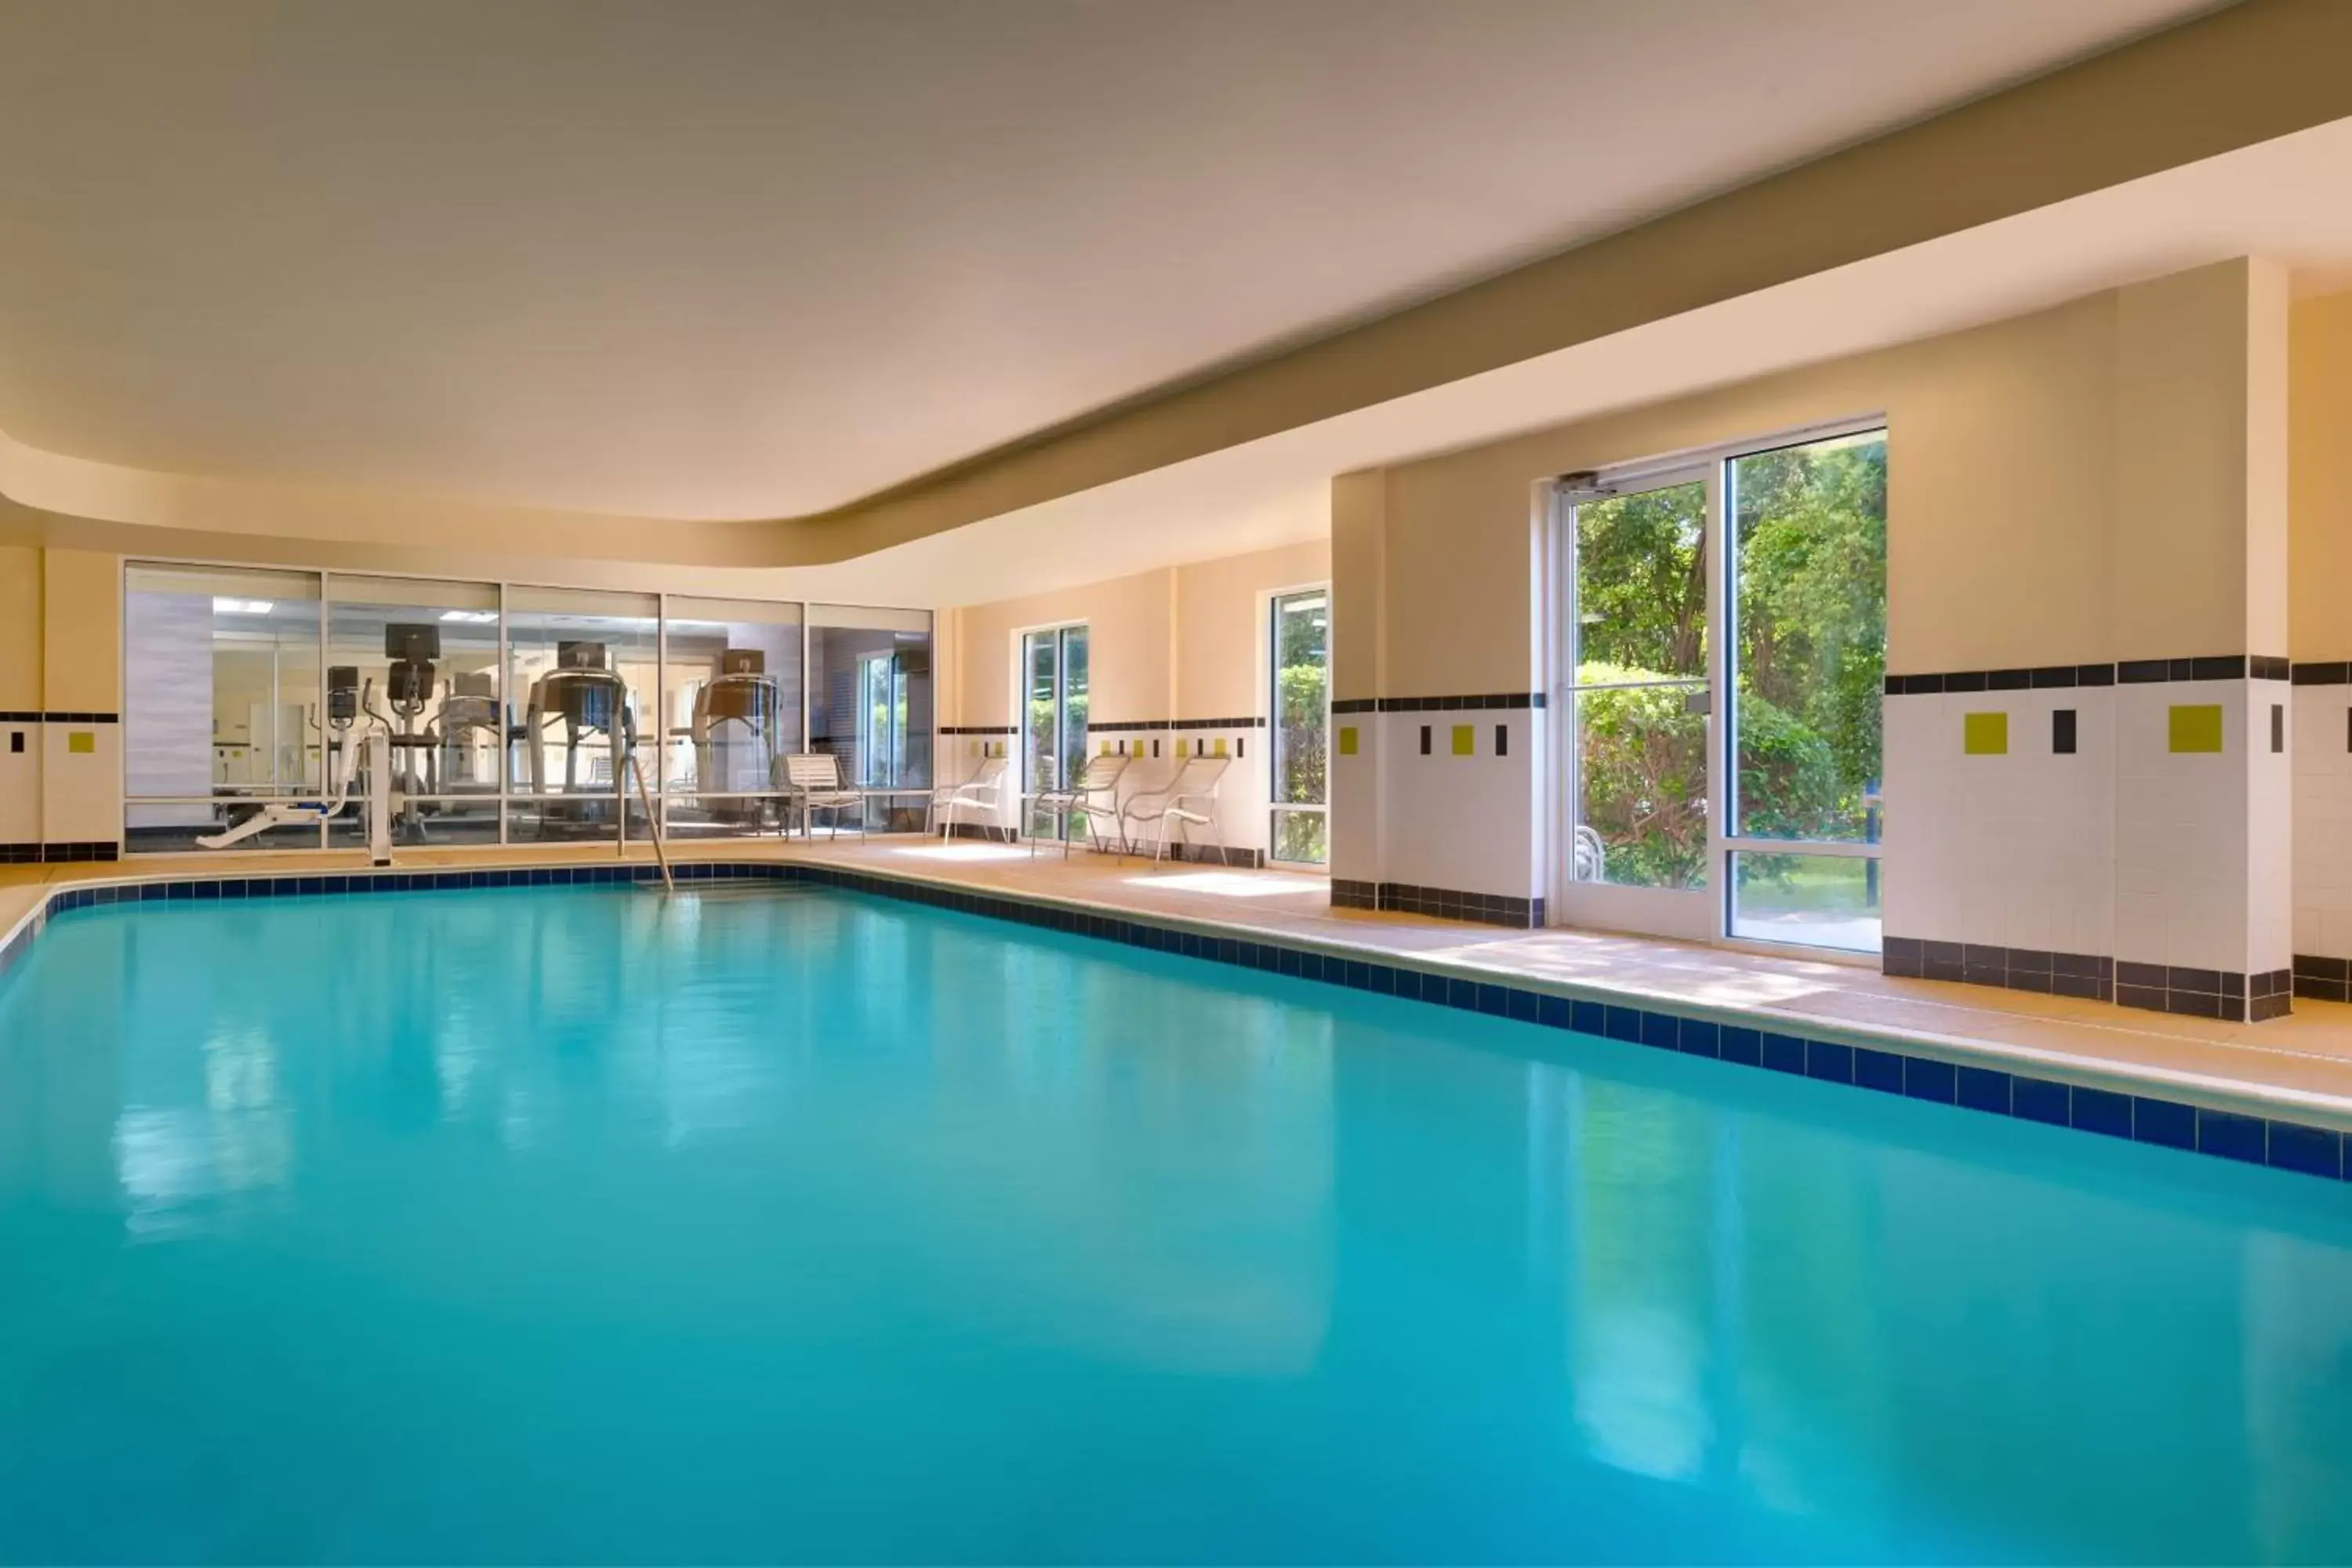 Swimming Pool in Fairfield Inn & Suites by Marriott Tallahassee Central